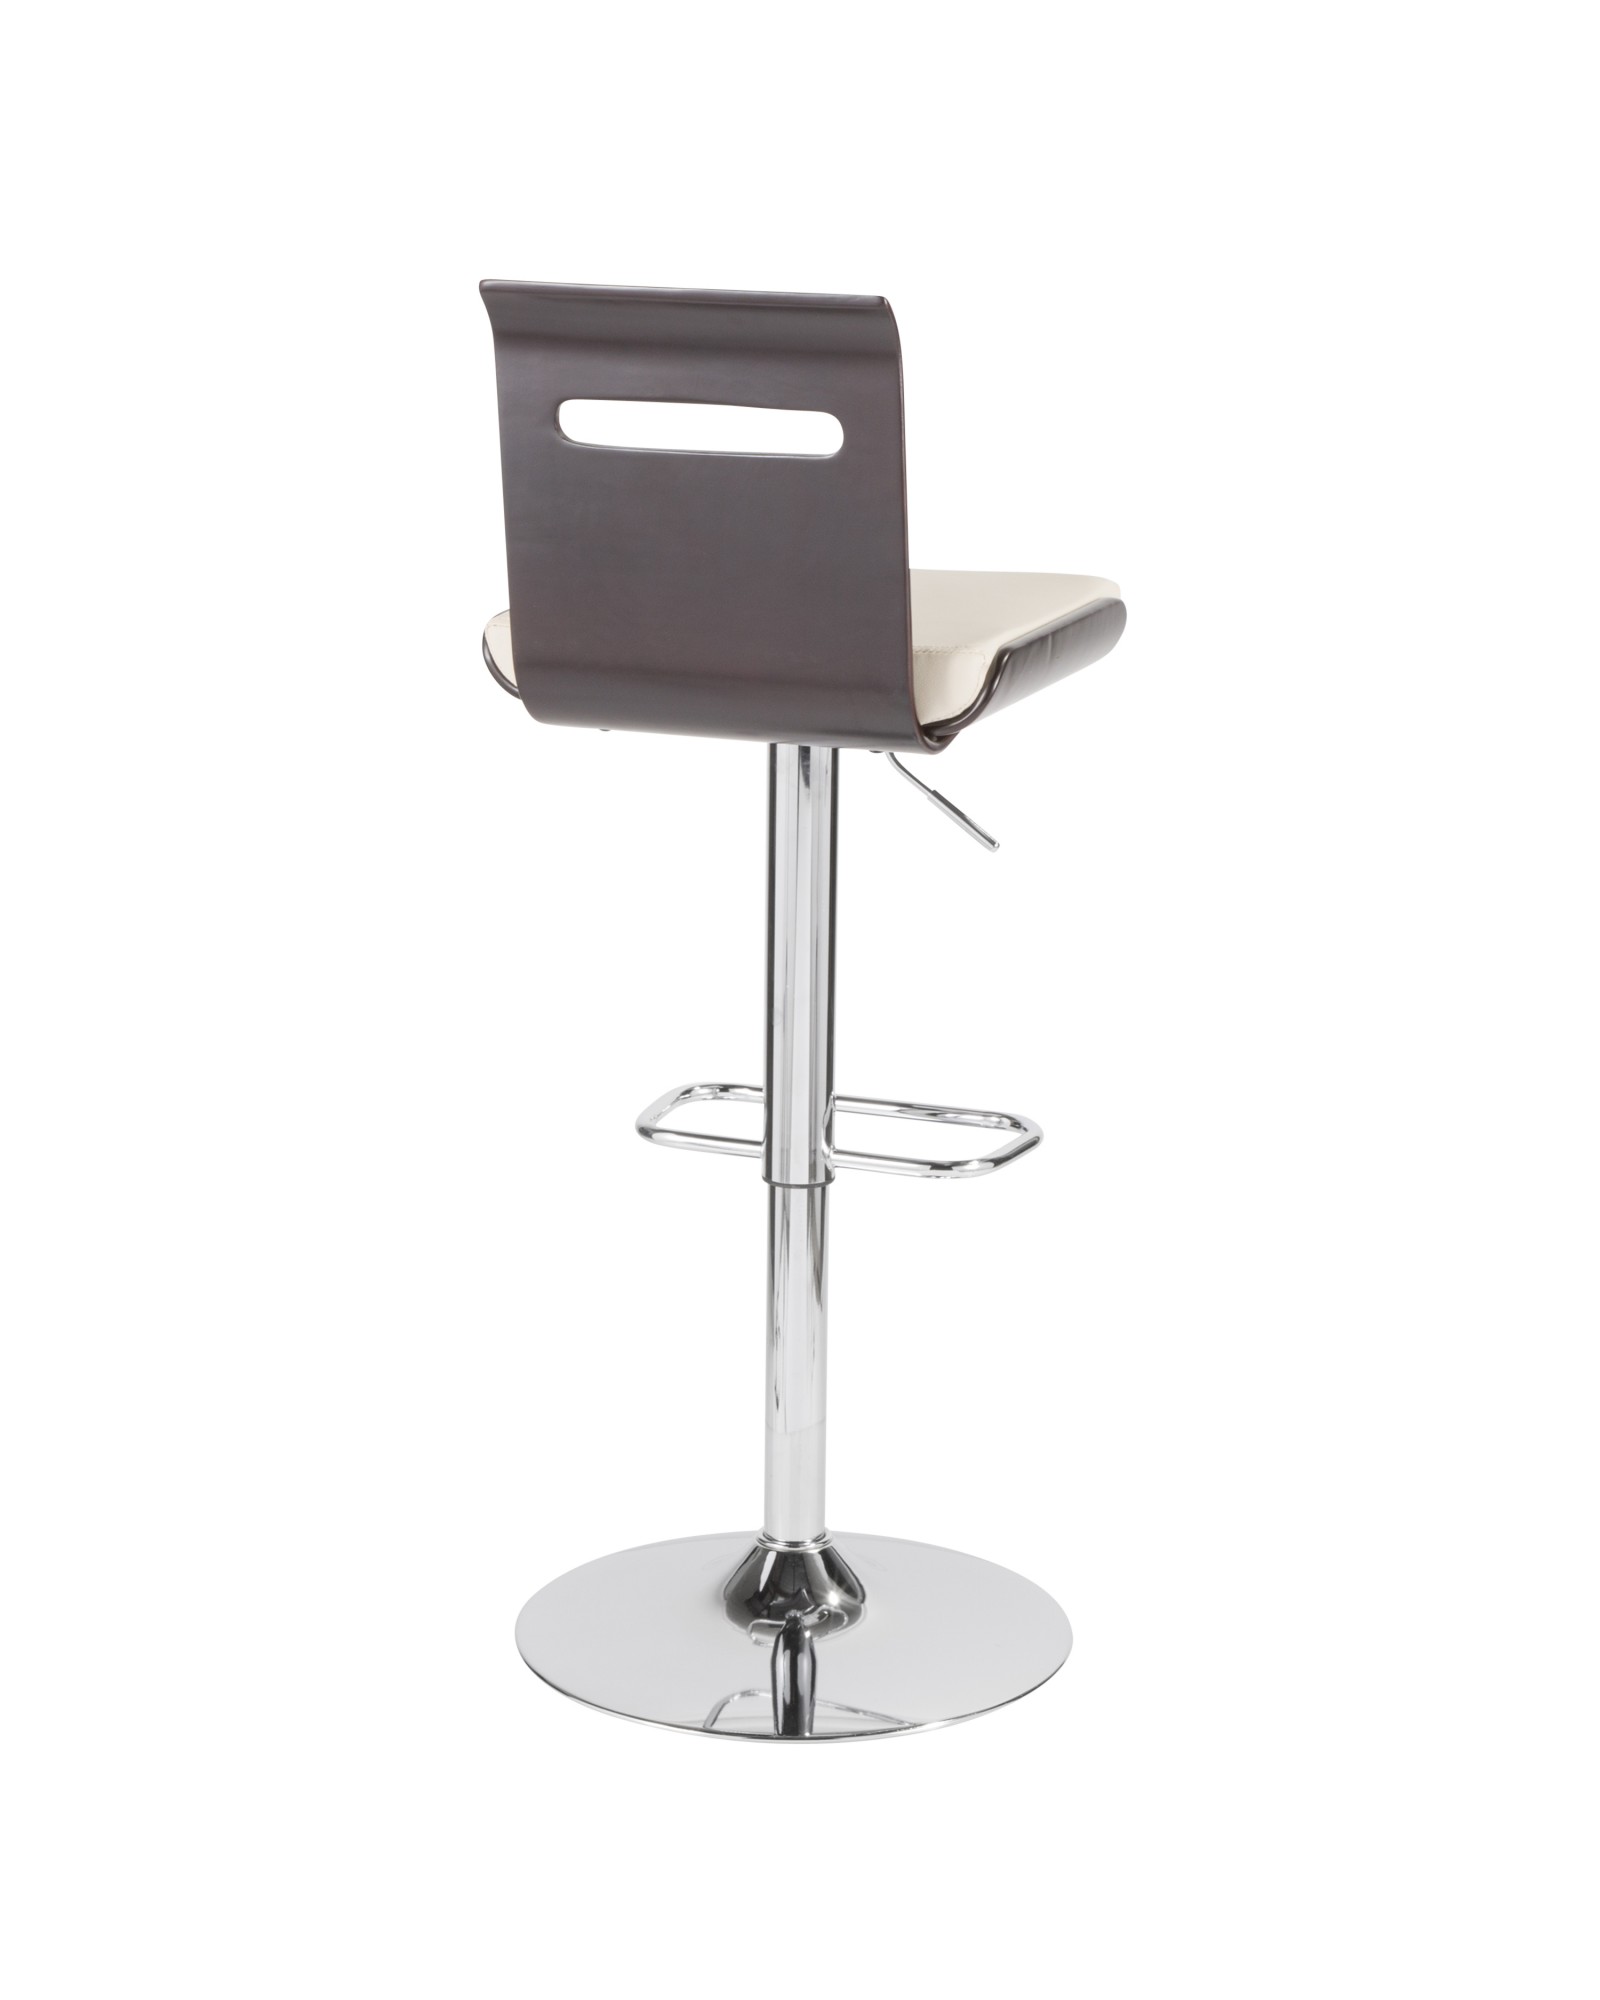 Viera Mid-Century Modern Adjustable Barstool with Swivel in Wenge and White Faux Leather